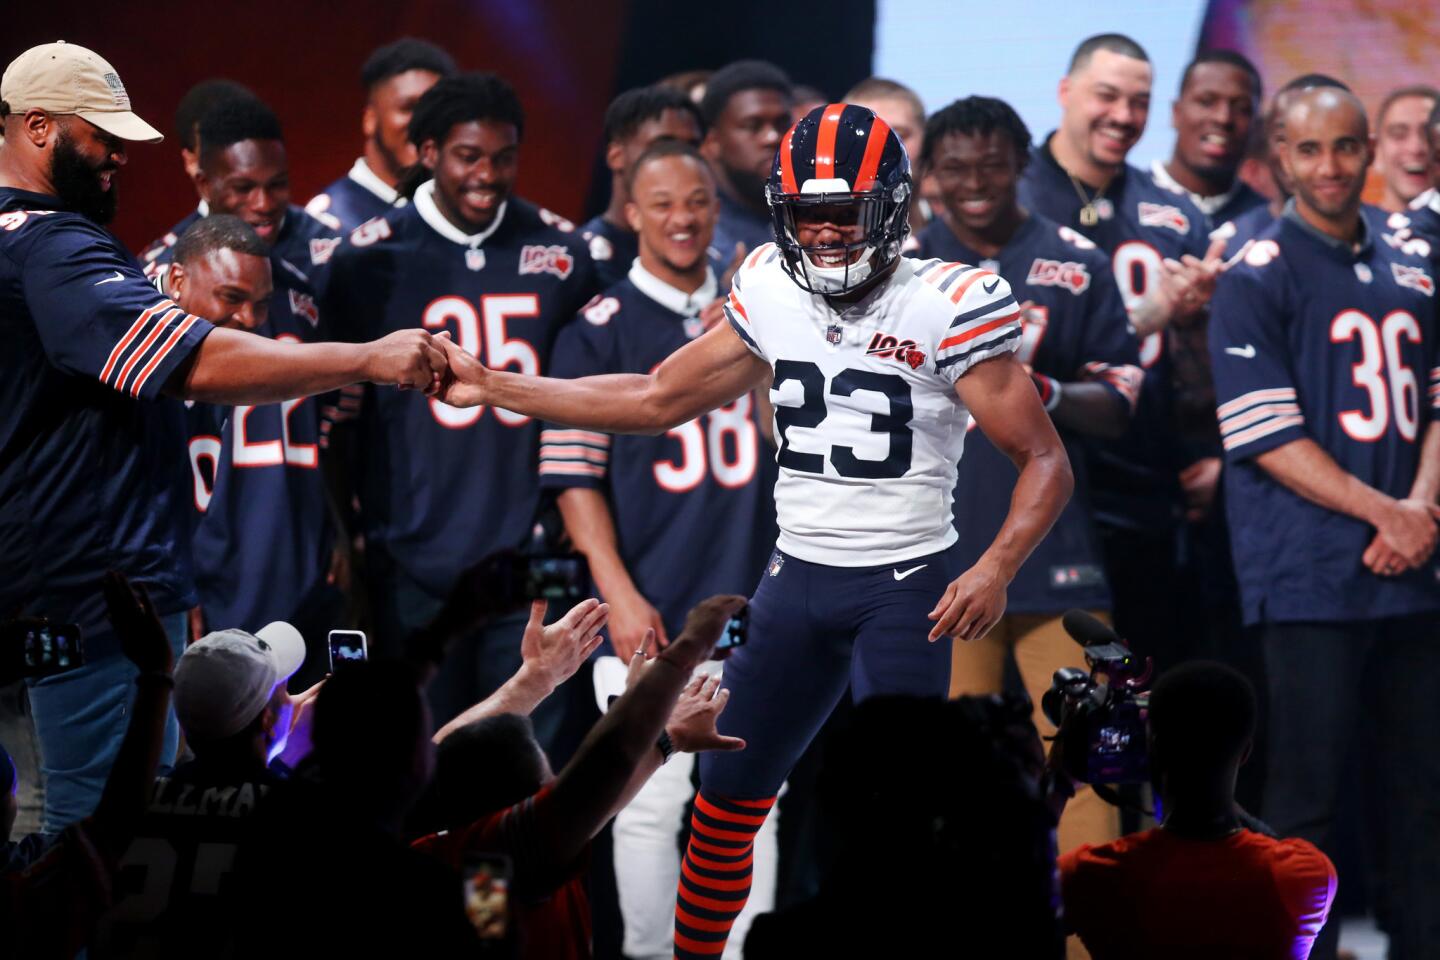 Chicago Bears player Kyle Fuller shows off a new jersey during the Bears100 Celebration Weekend at the Donald E. Stephens Convention Center in Rosemont on Friday, June 7, 2019. (Chris Sweda/Chicago Tribune)